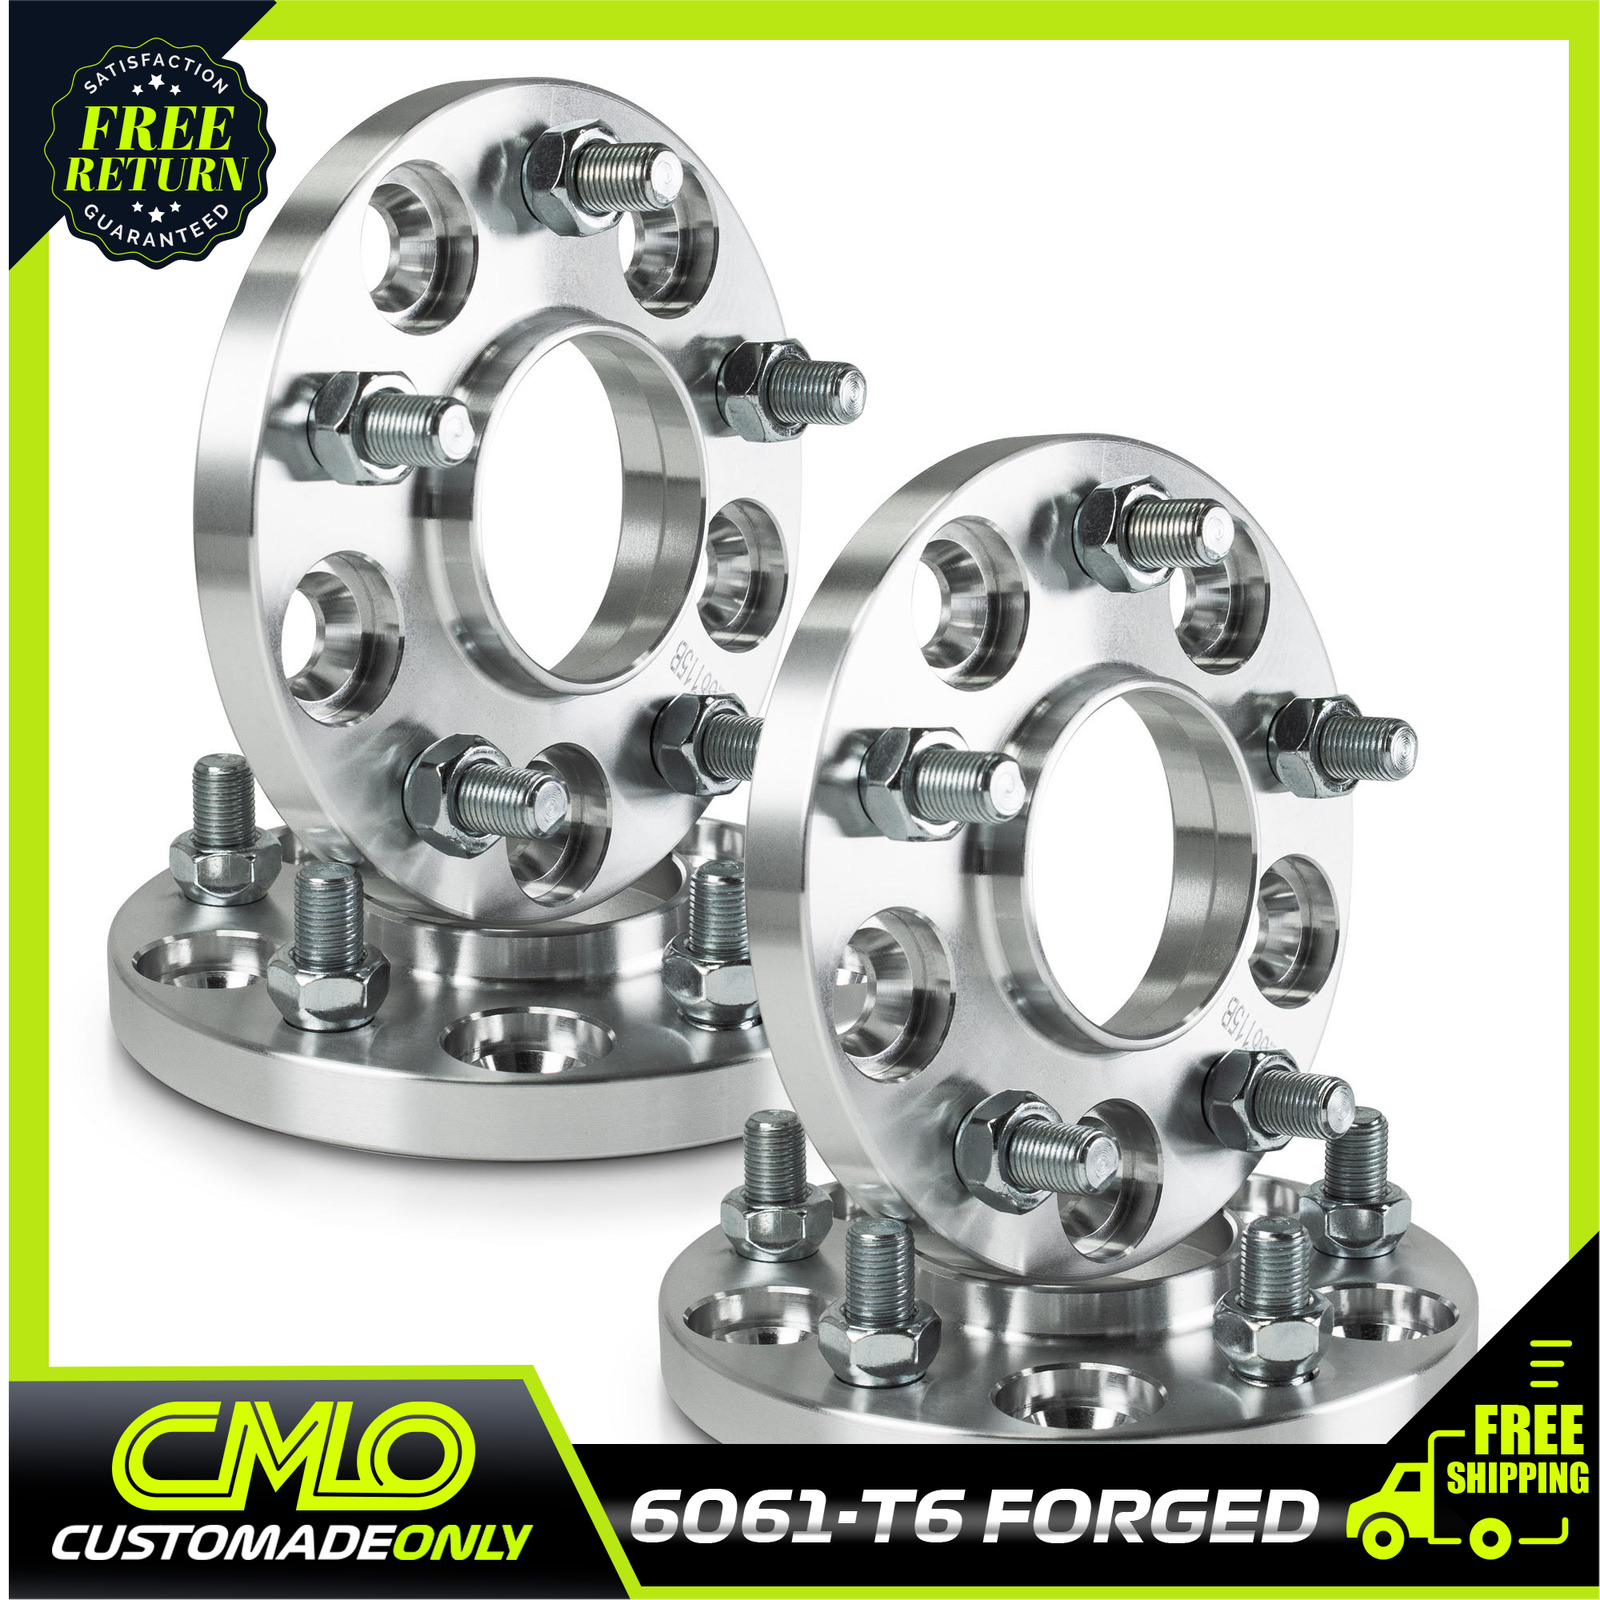 4pc 15mm Hubcentric Wheel Spacers 5x100 Fits Scion tC Celica Camry Corolla Prius